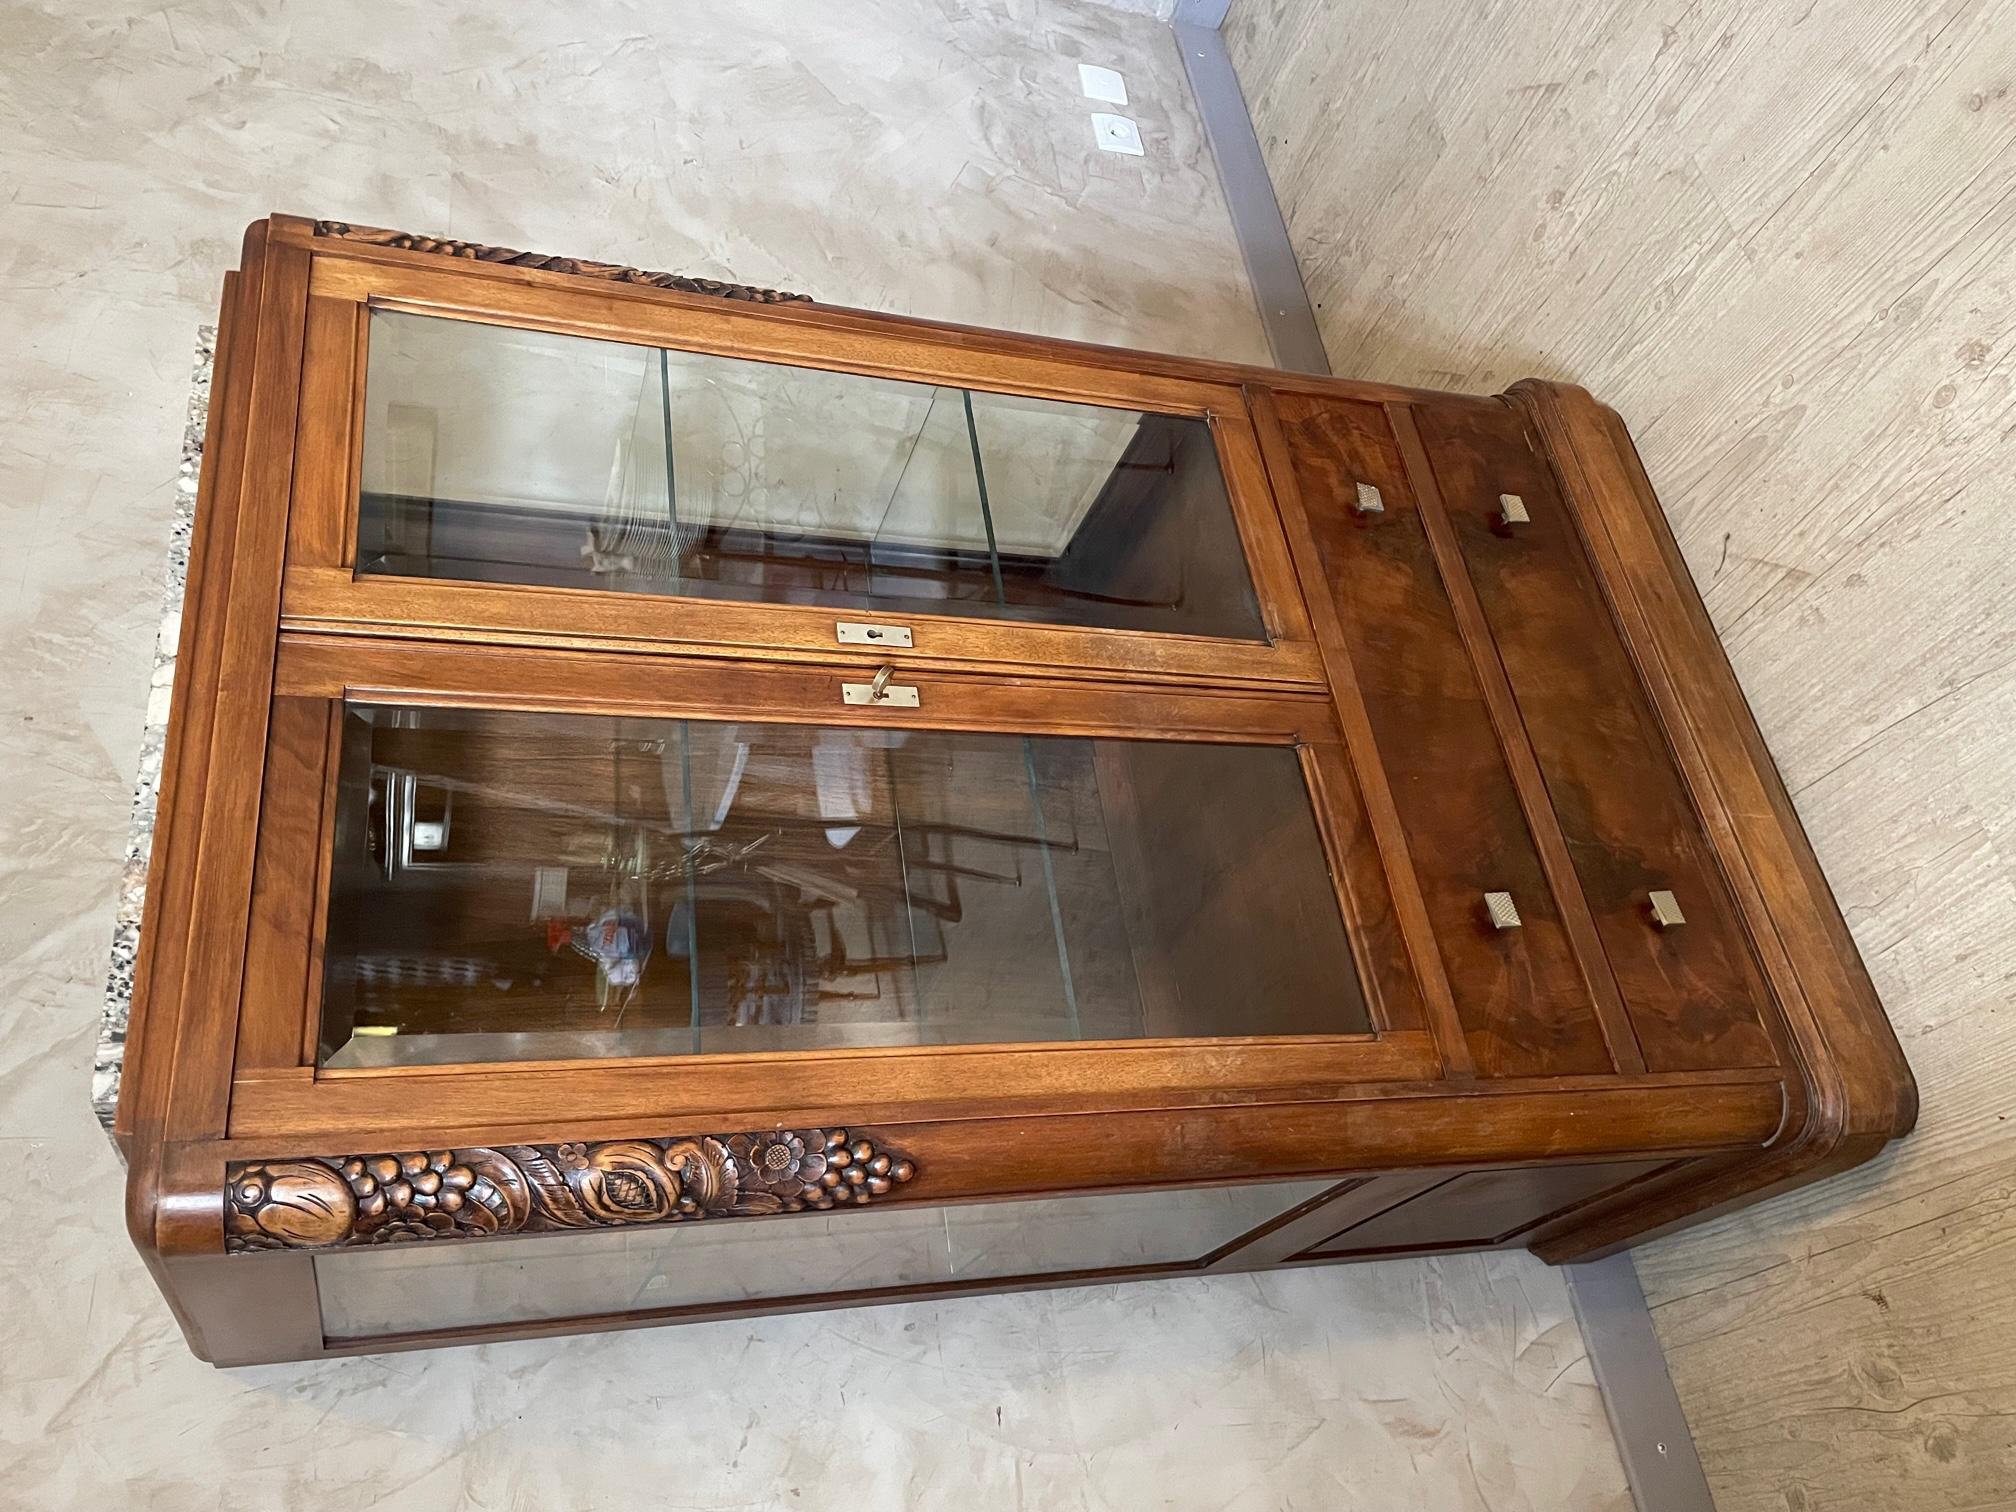 Very beautiful and rare small Art Deco vitrine in walnut.
Flowers engraved in the wood which represents the 1930s period. 
Bevelled glass doors and sides. Two glass shelves.
Two large drawers on the bottom with brass handles.
Marble top on top.